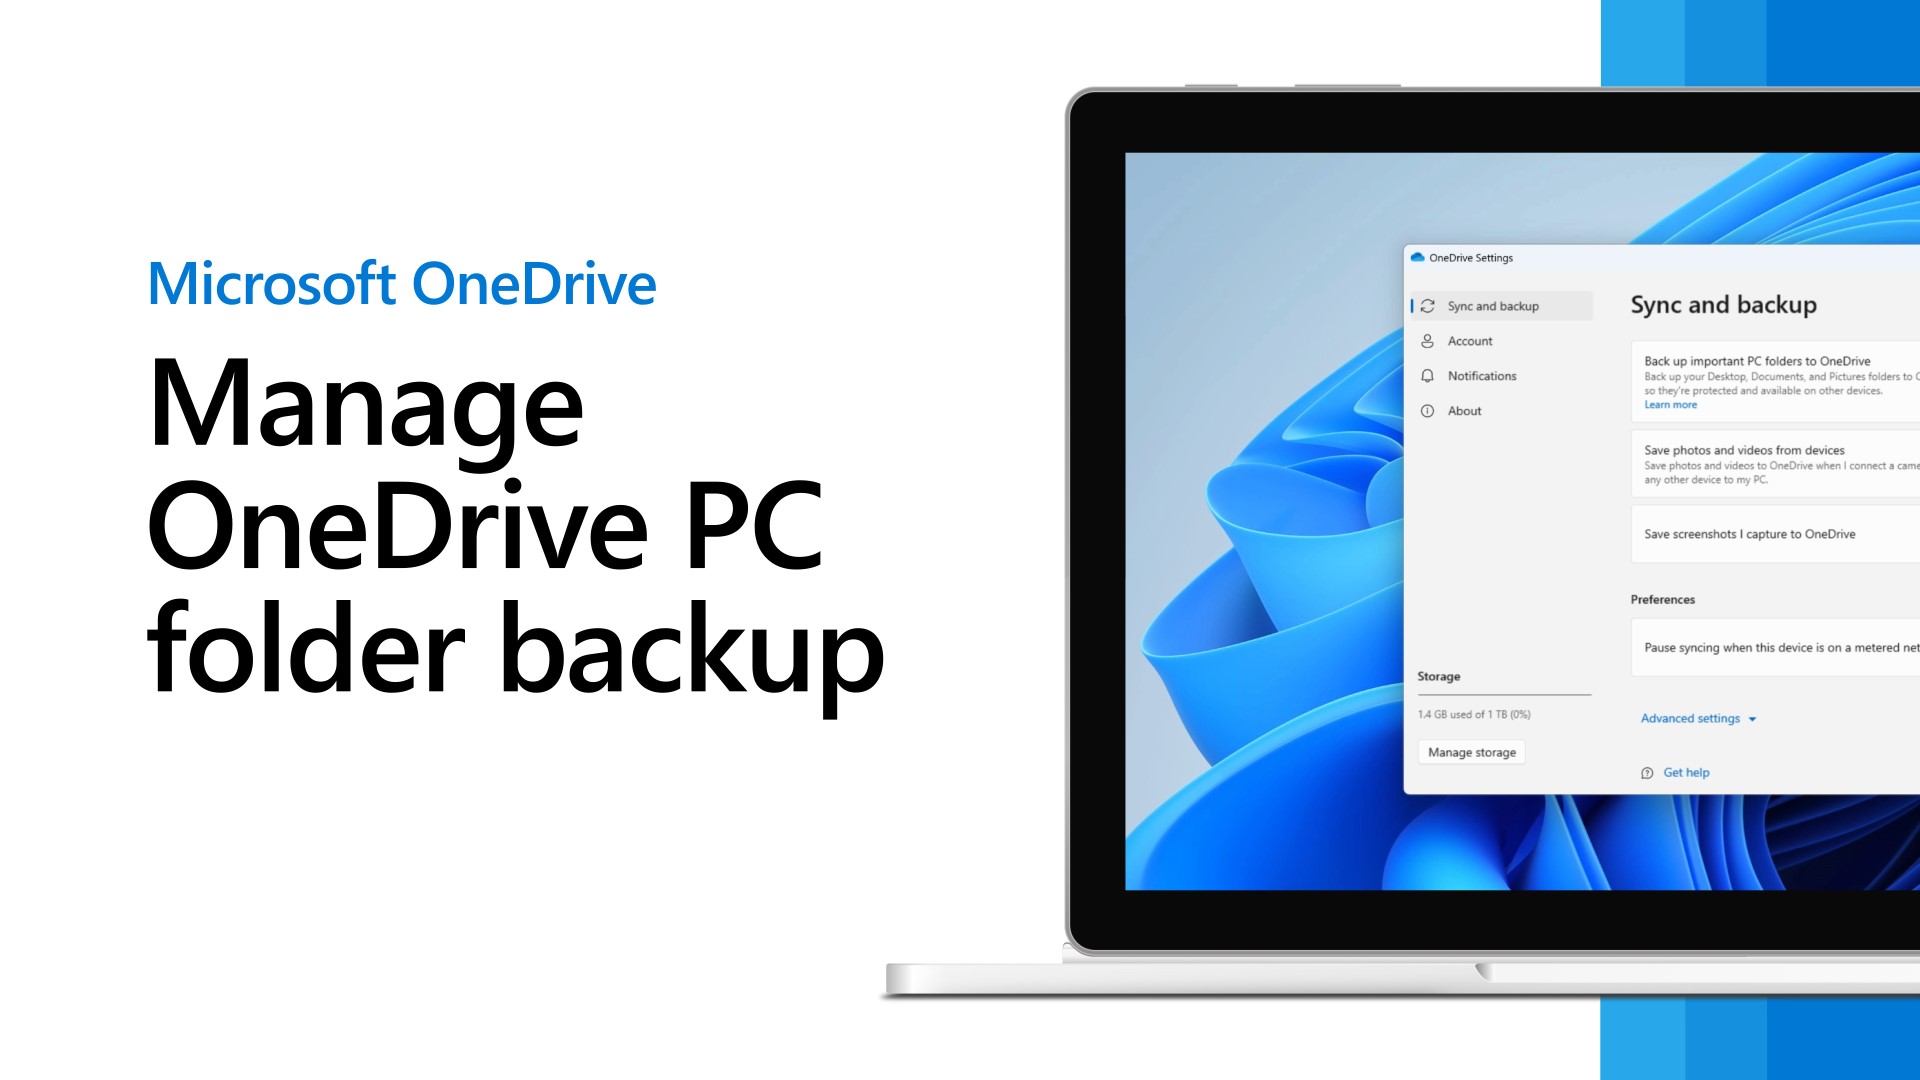 Can I back up my whole computer to OneDrive?